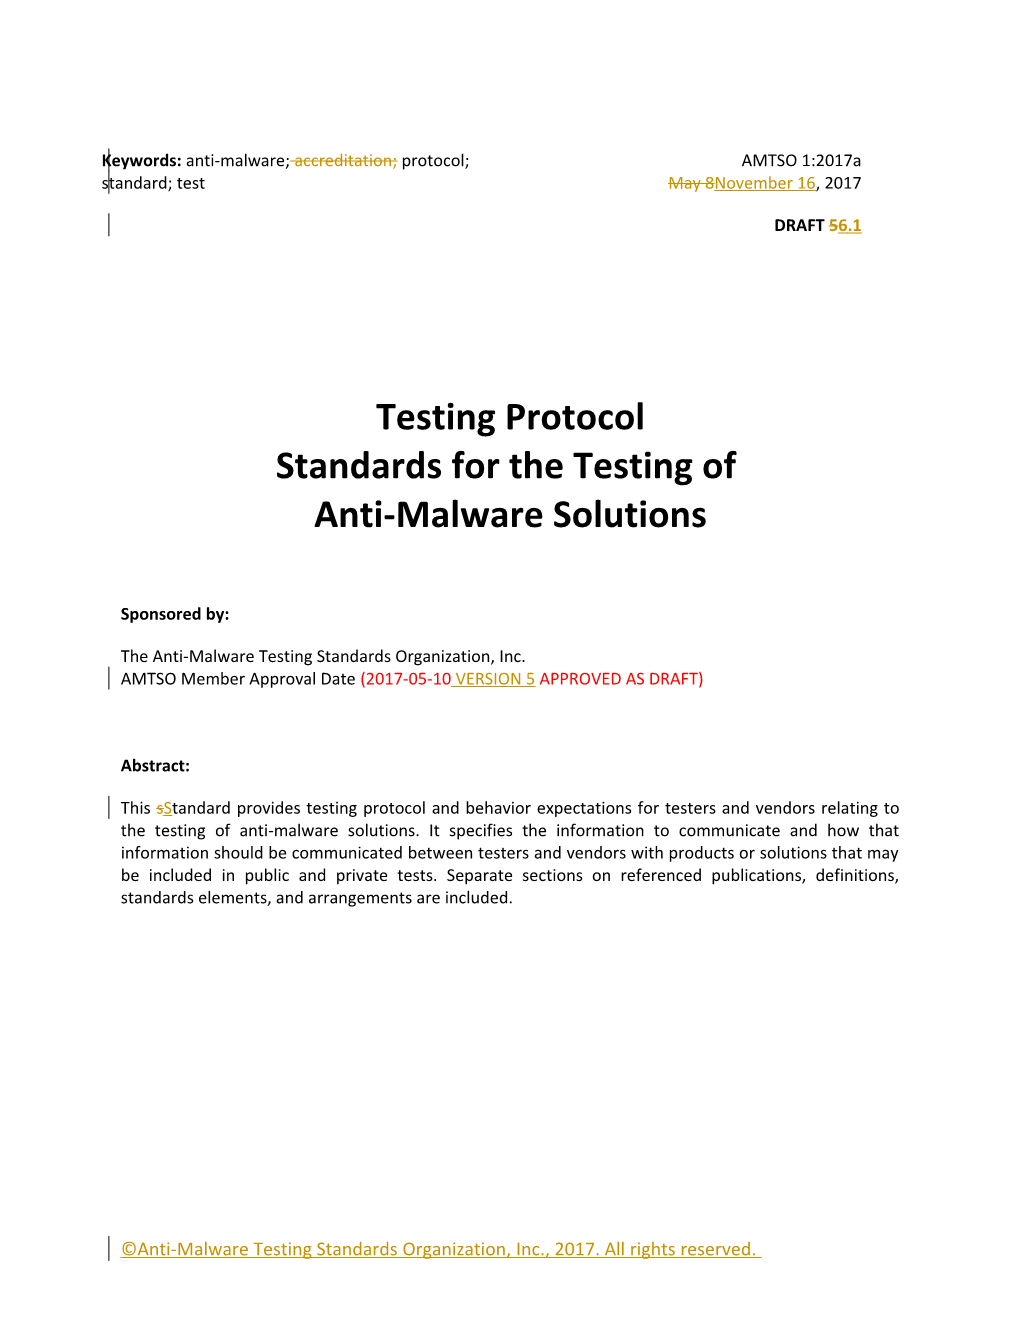 Testing Protocol Standards for the Testing of Anti-Malware Solutions